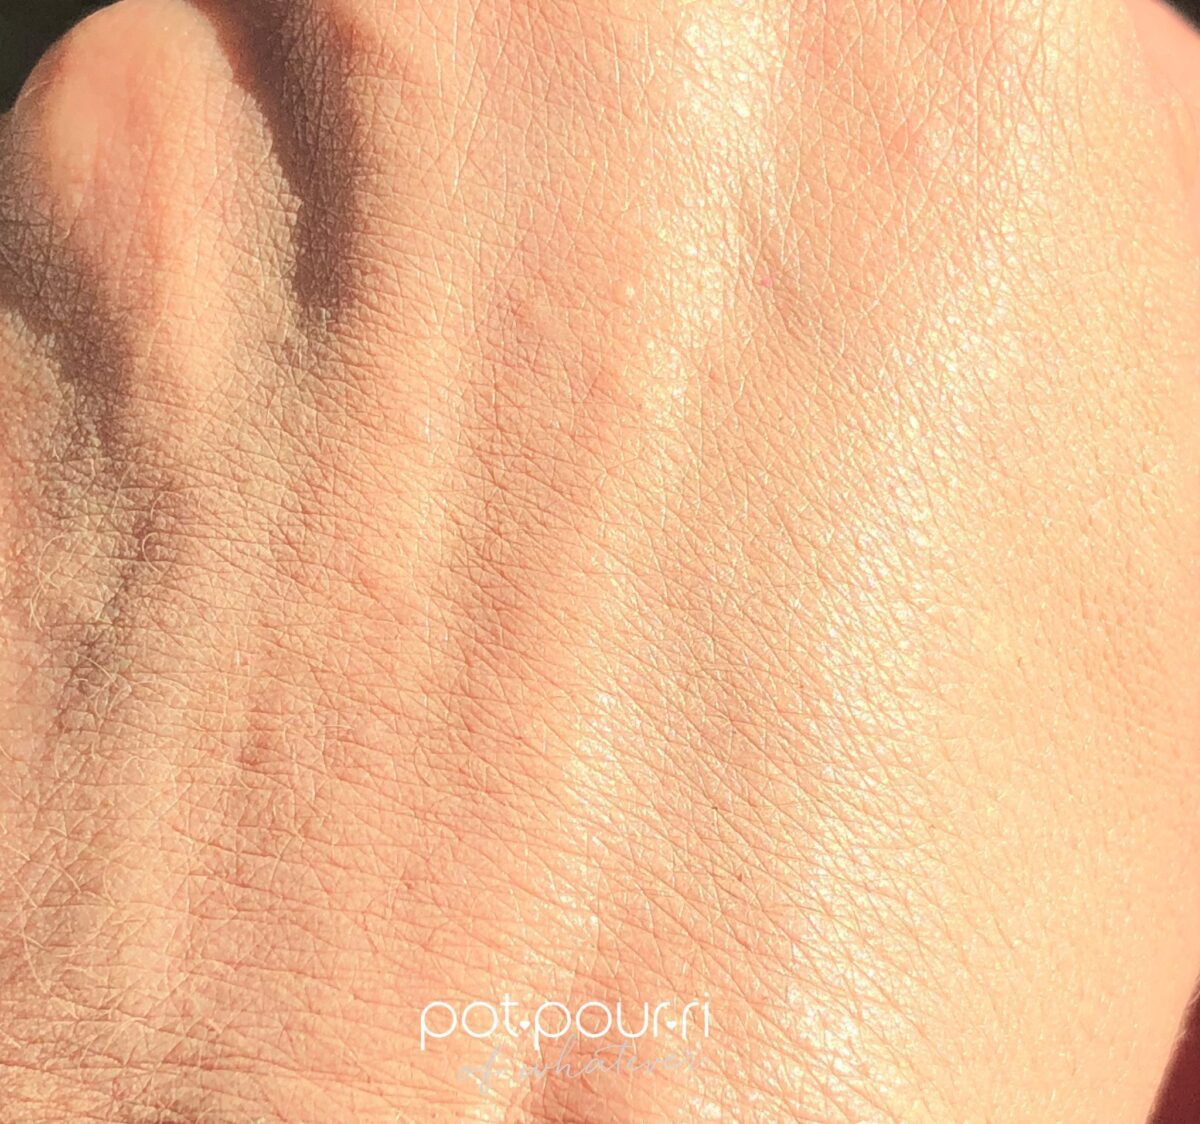 SWATCH OF SHADE MEDIUM+ 3.25 SWATCH BLENDED ON HAND